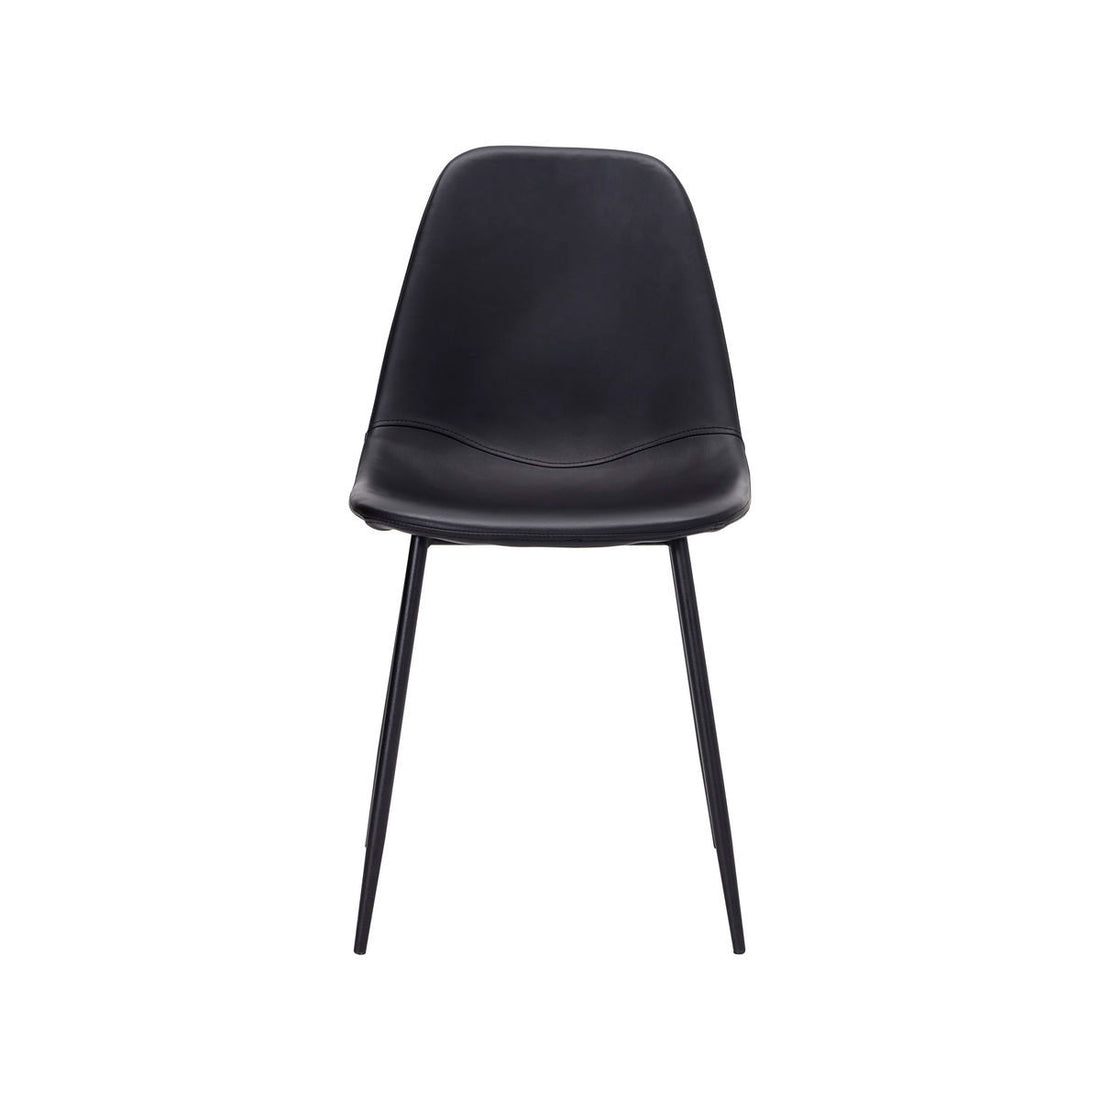 House Doctor Chair, Hdfound, Black